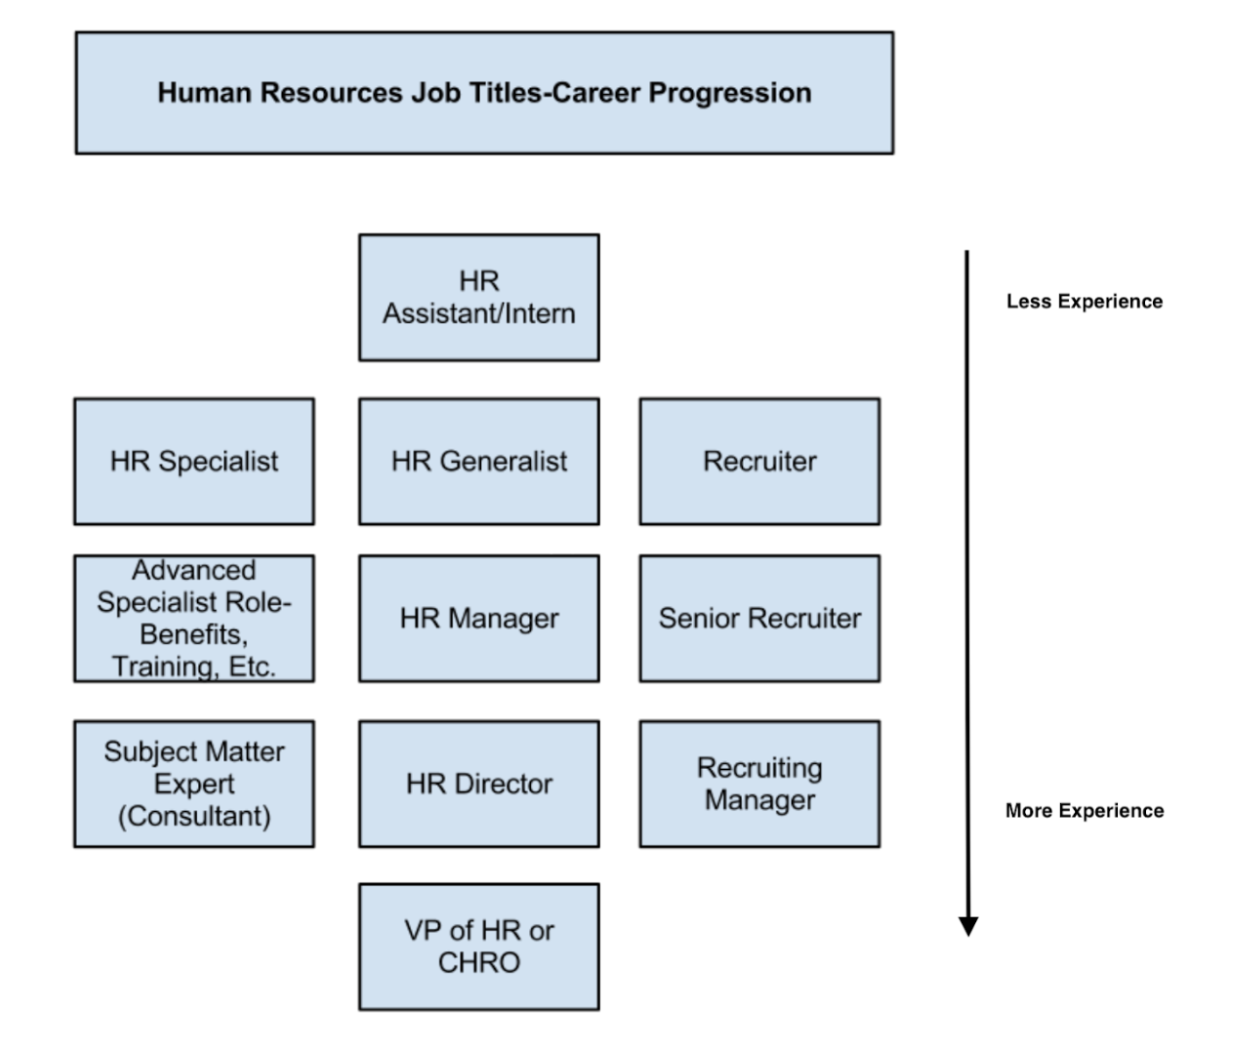 should human resources department be capitalized